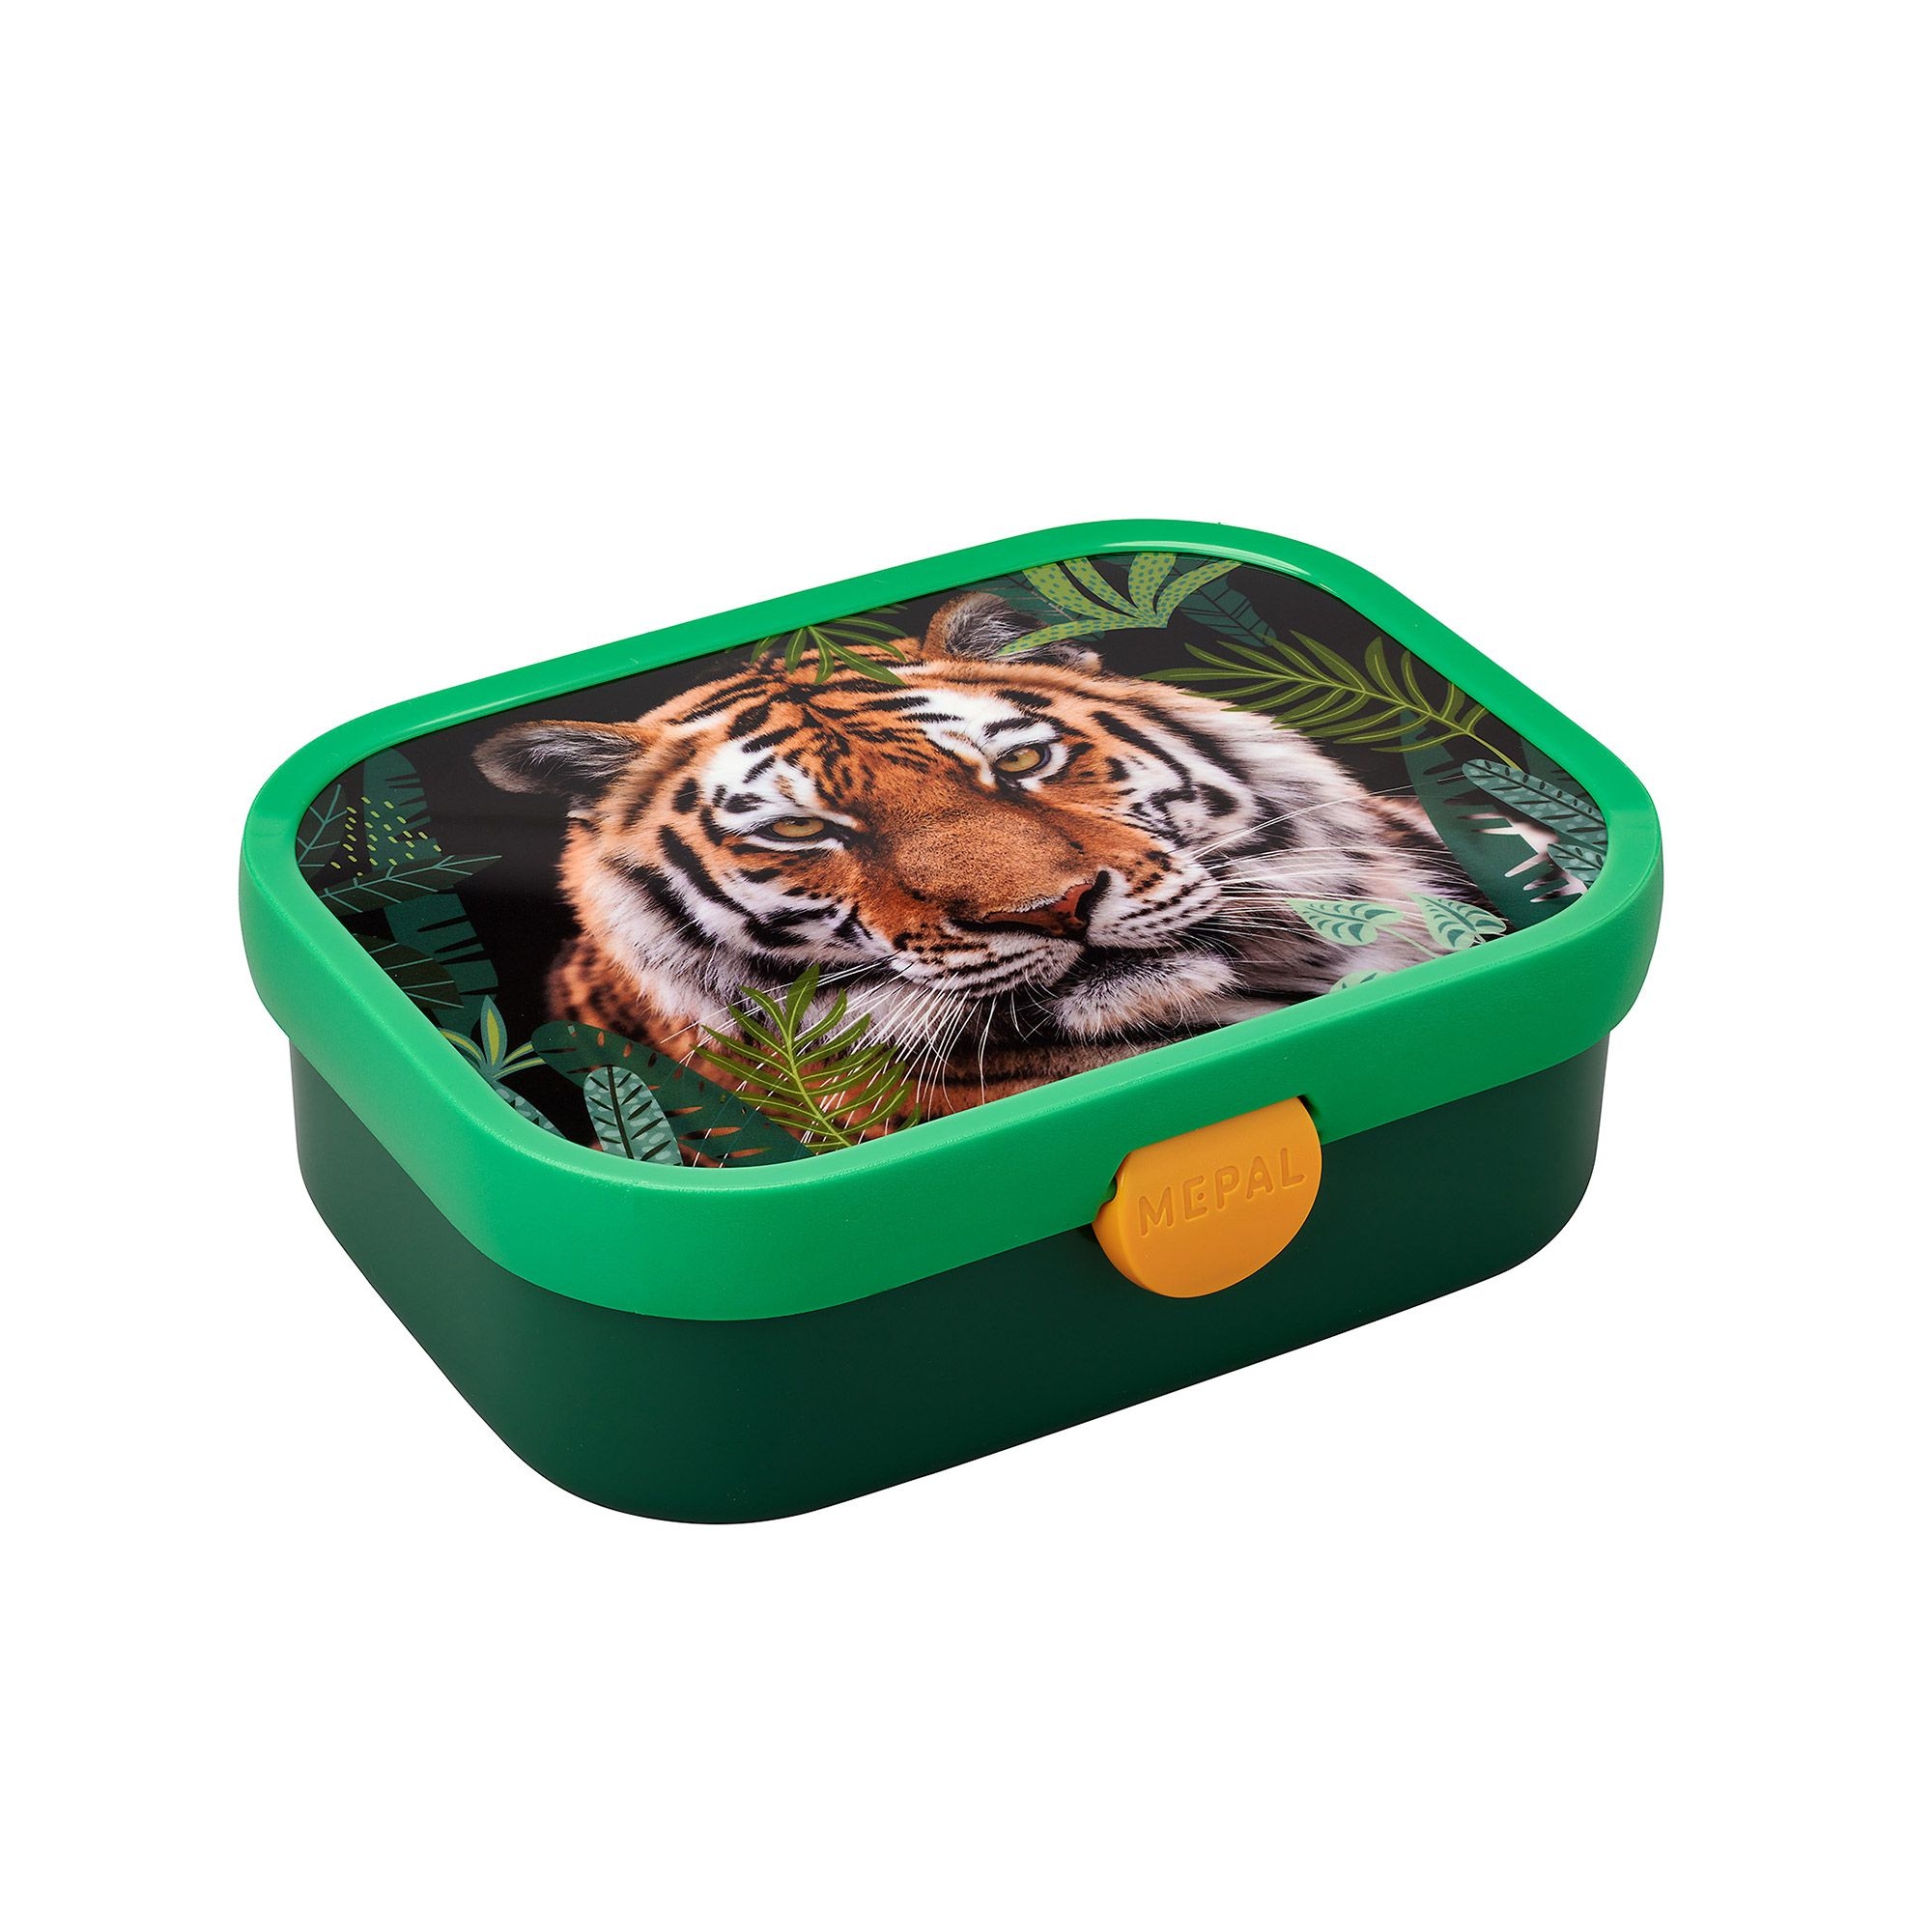 Mepal - Campus Wild Tiger - different products